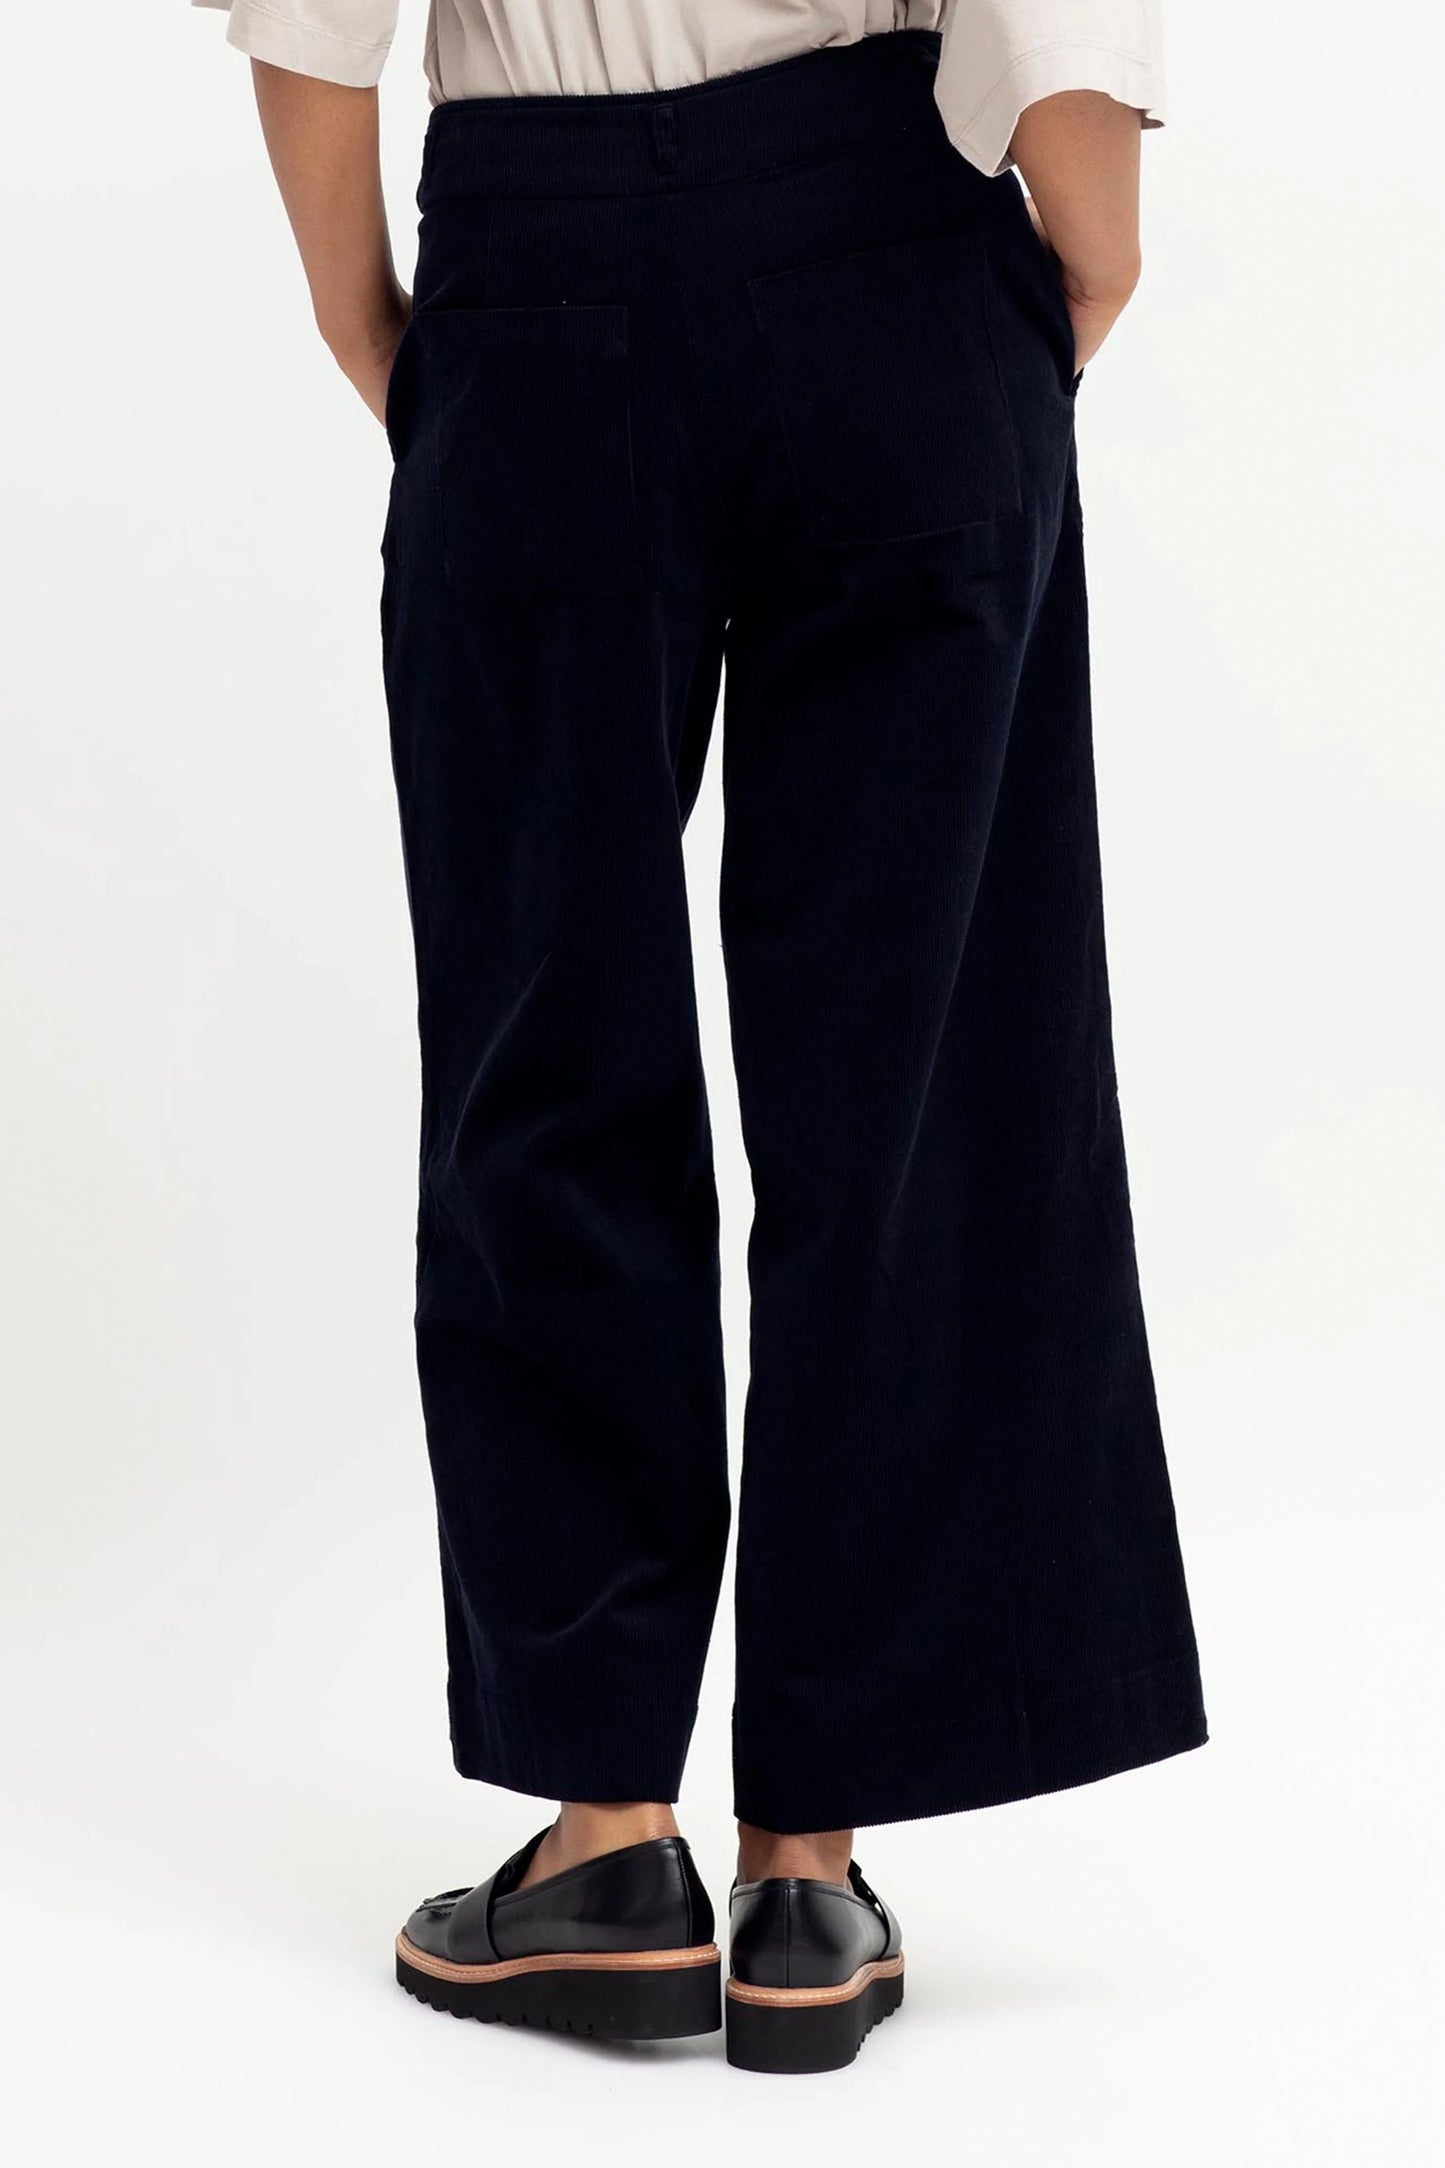 
                  
                    Koord Pant Crafted from an organic cotton fine cord, the Koord Pant is a wide leg pant with a hem turn up, hitting at or just below the ankle bone. Secured at the waist with a flat waistband with belt loops, and a front zip fly plus a hook and bar closure, this pant features angled front side pockets and back patch pockets. There are darts at the back of the pant for an improved fit.
                  
                